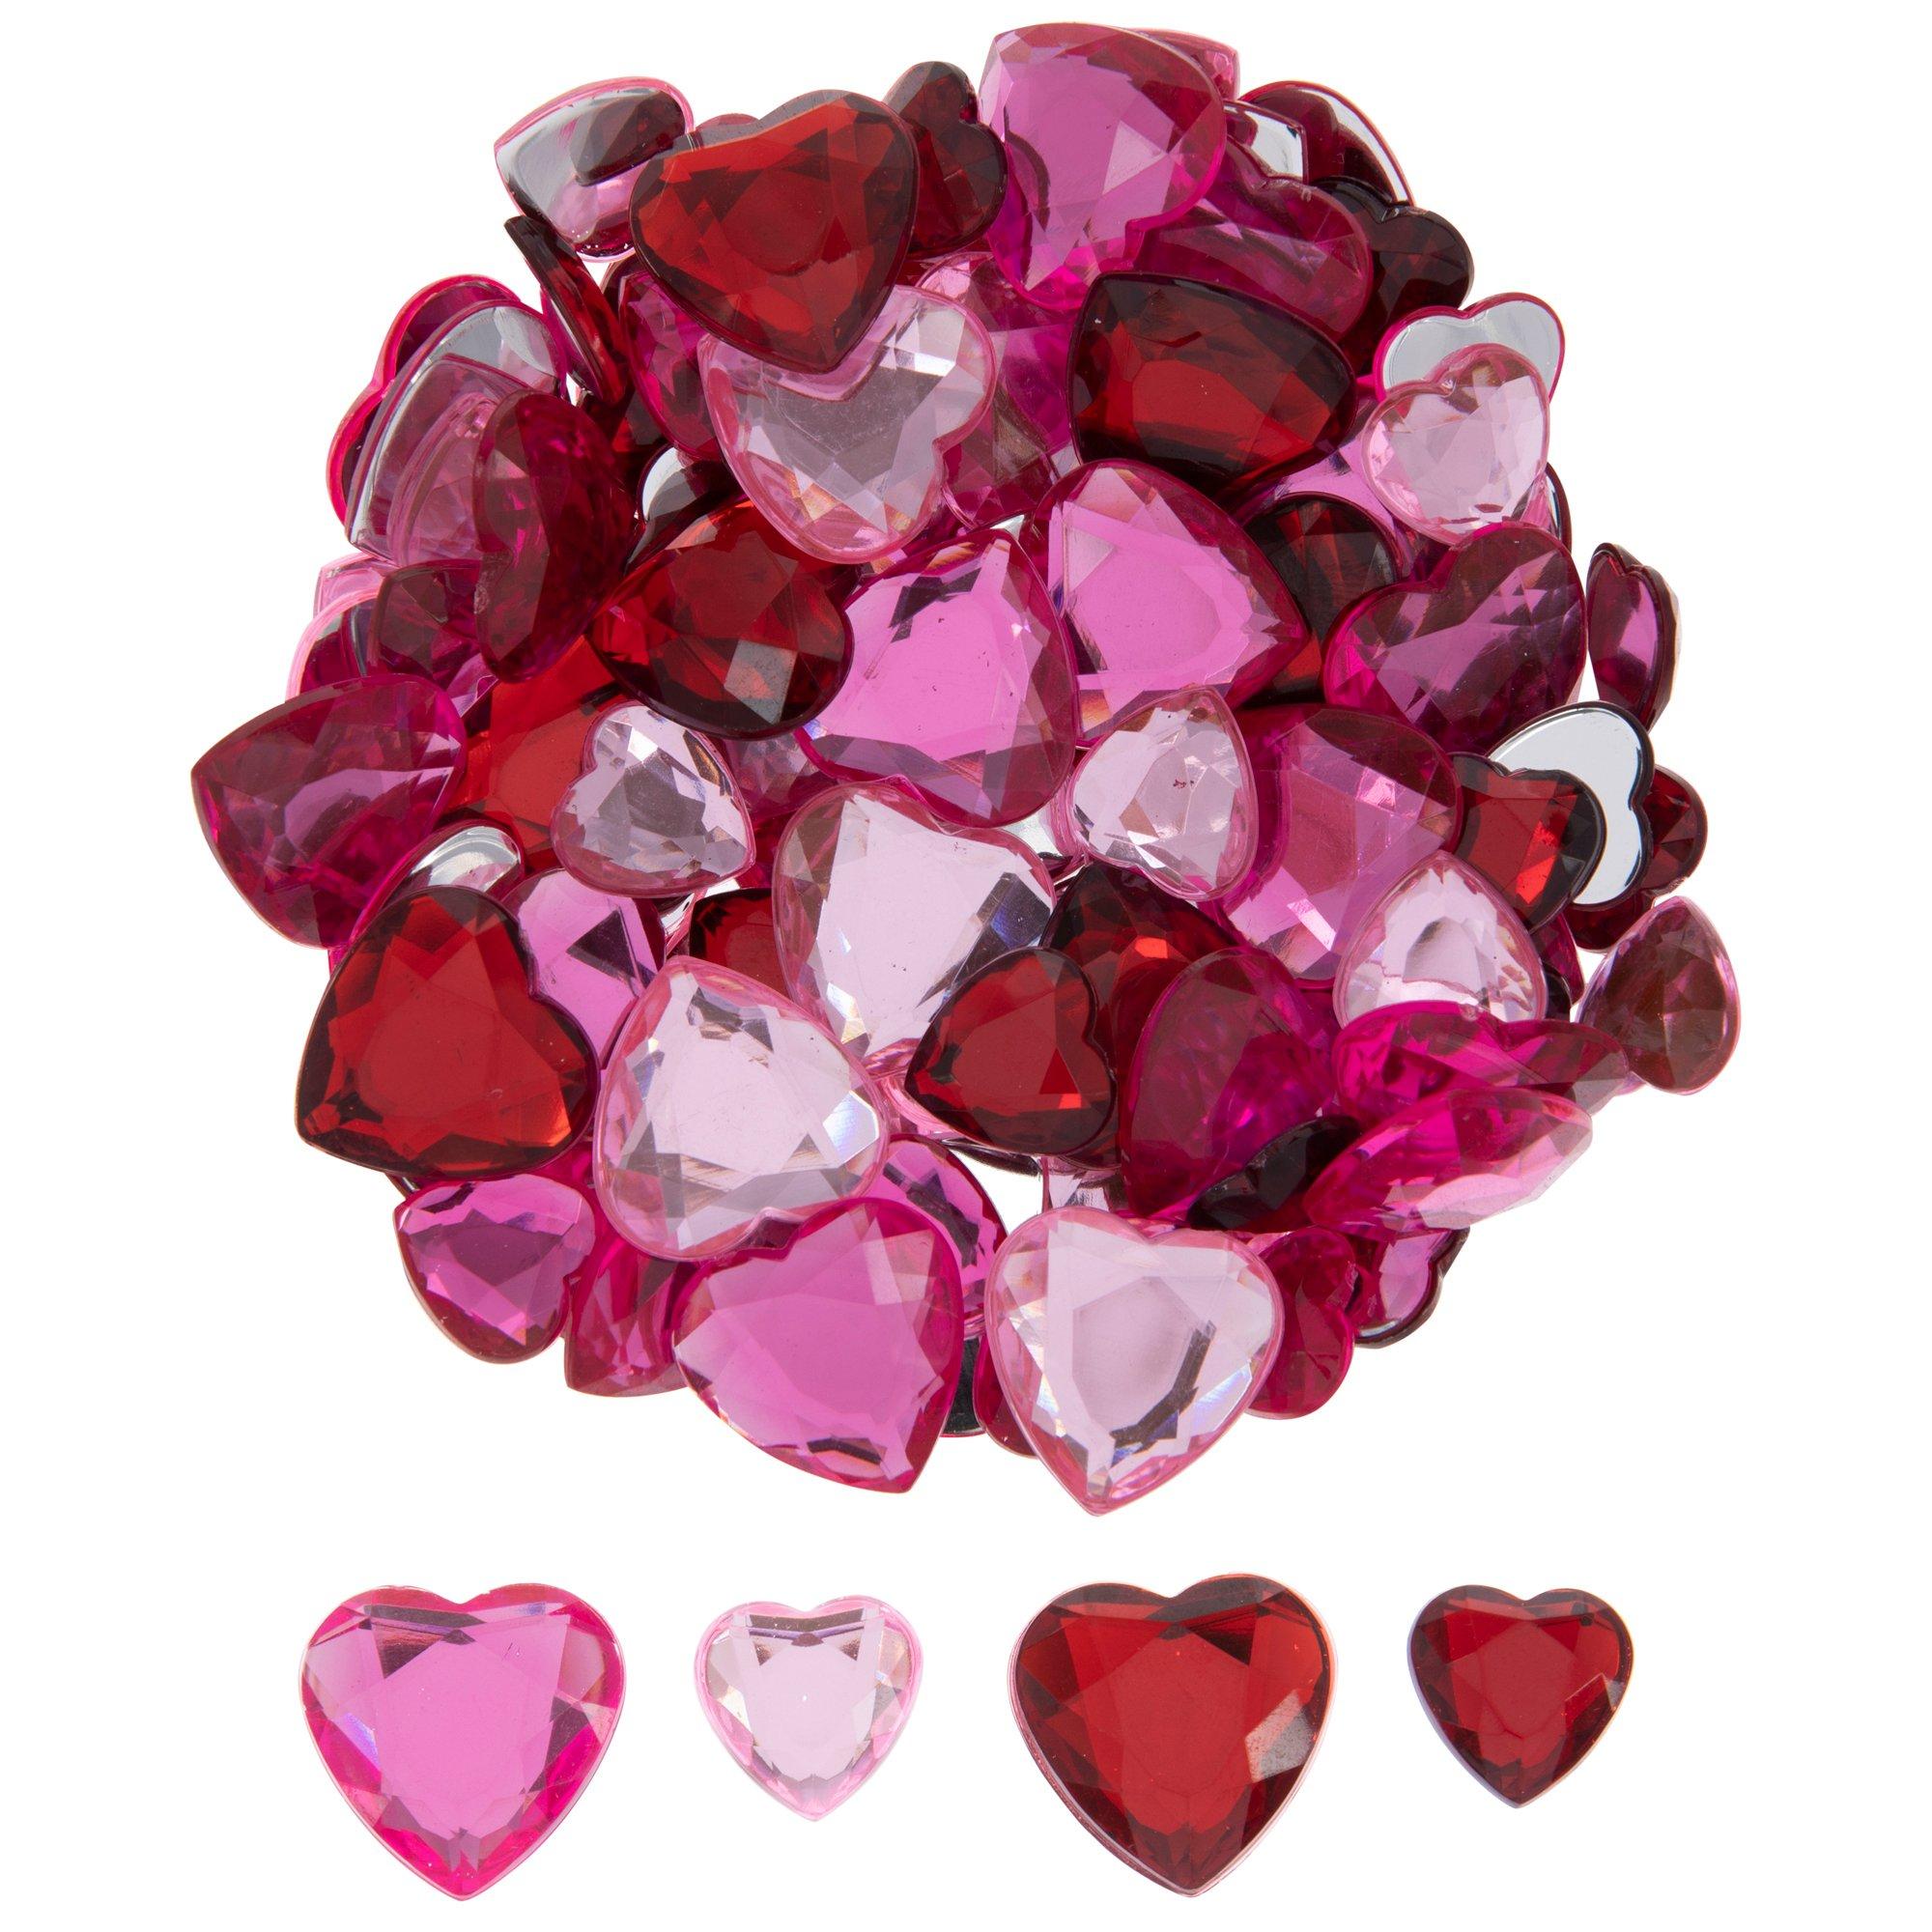 Red Acrylic Hearts - Various Sizes - Pack of 50